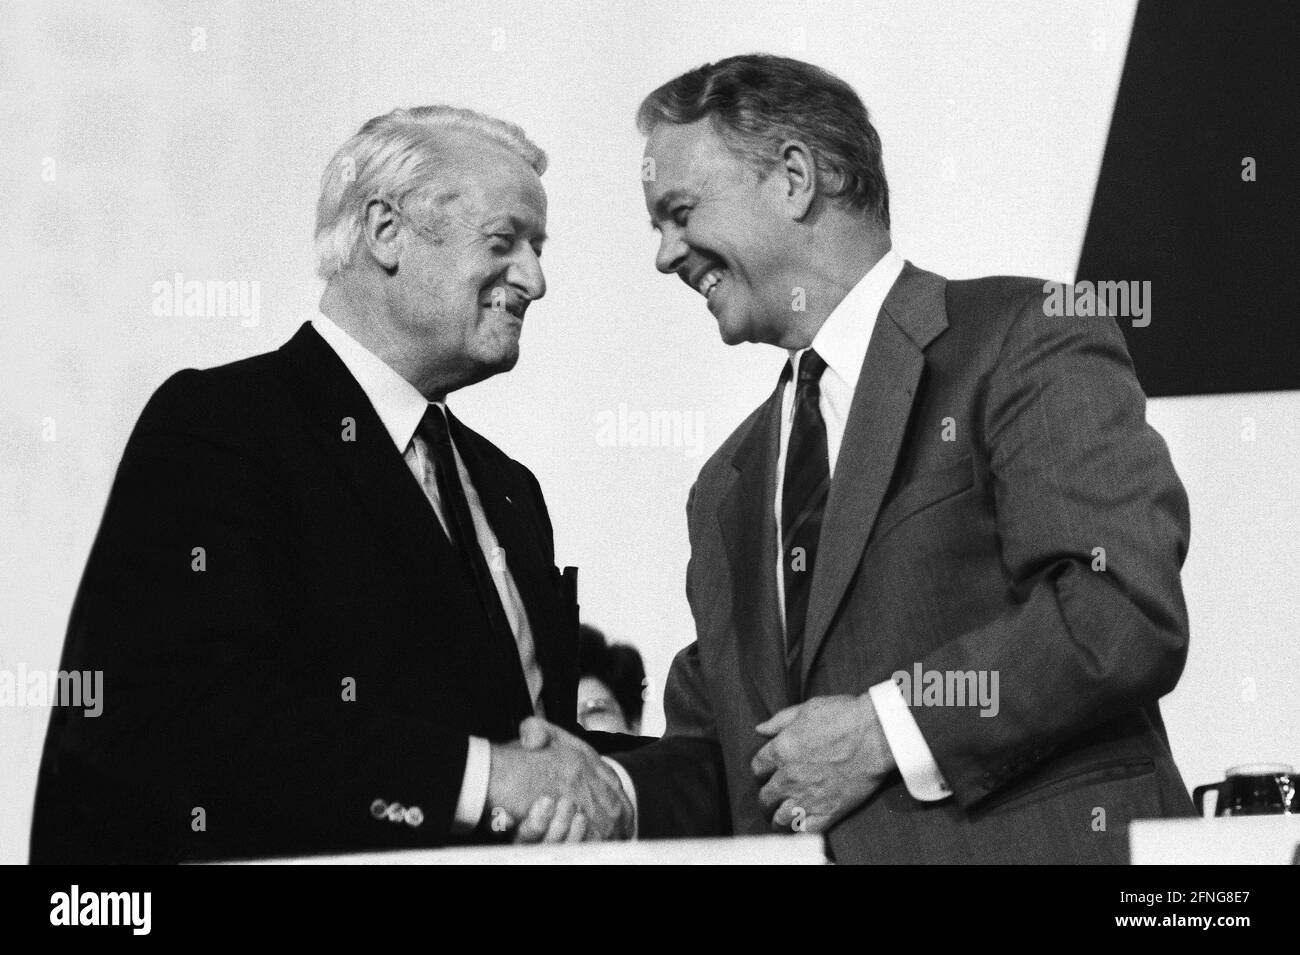 Germany, Hanover, 13.10.1989. Archive no.: 09-53-04 CDU-Landesparteitag-Niedersachsen Photo: Ernst Albrecht and Wilfried Hasselmann, regional chairman of the CDU [automated translation] Stock Photo